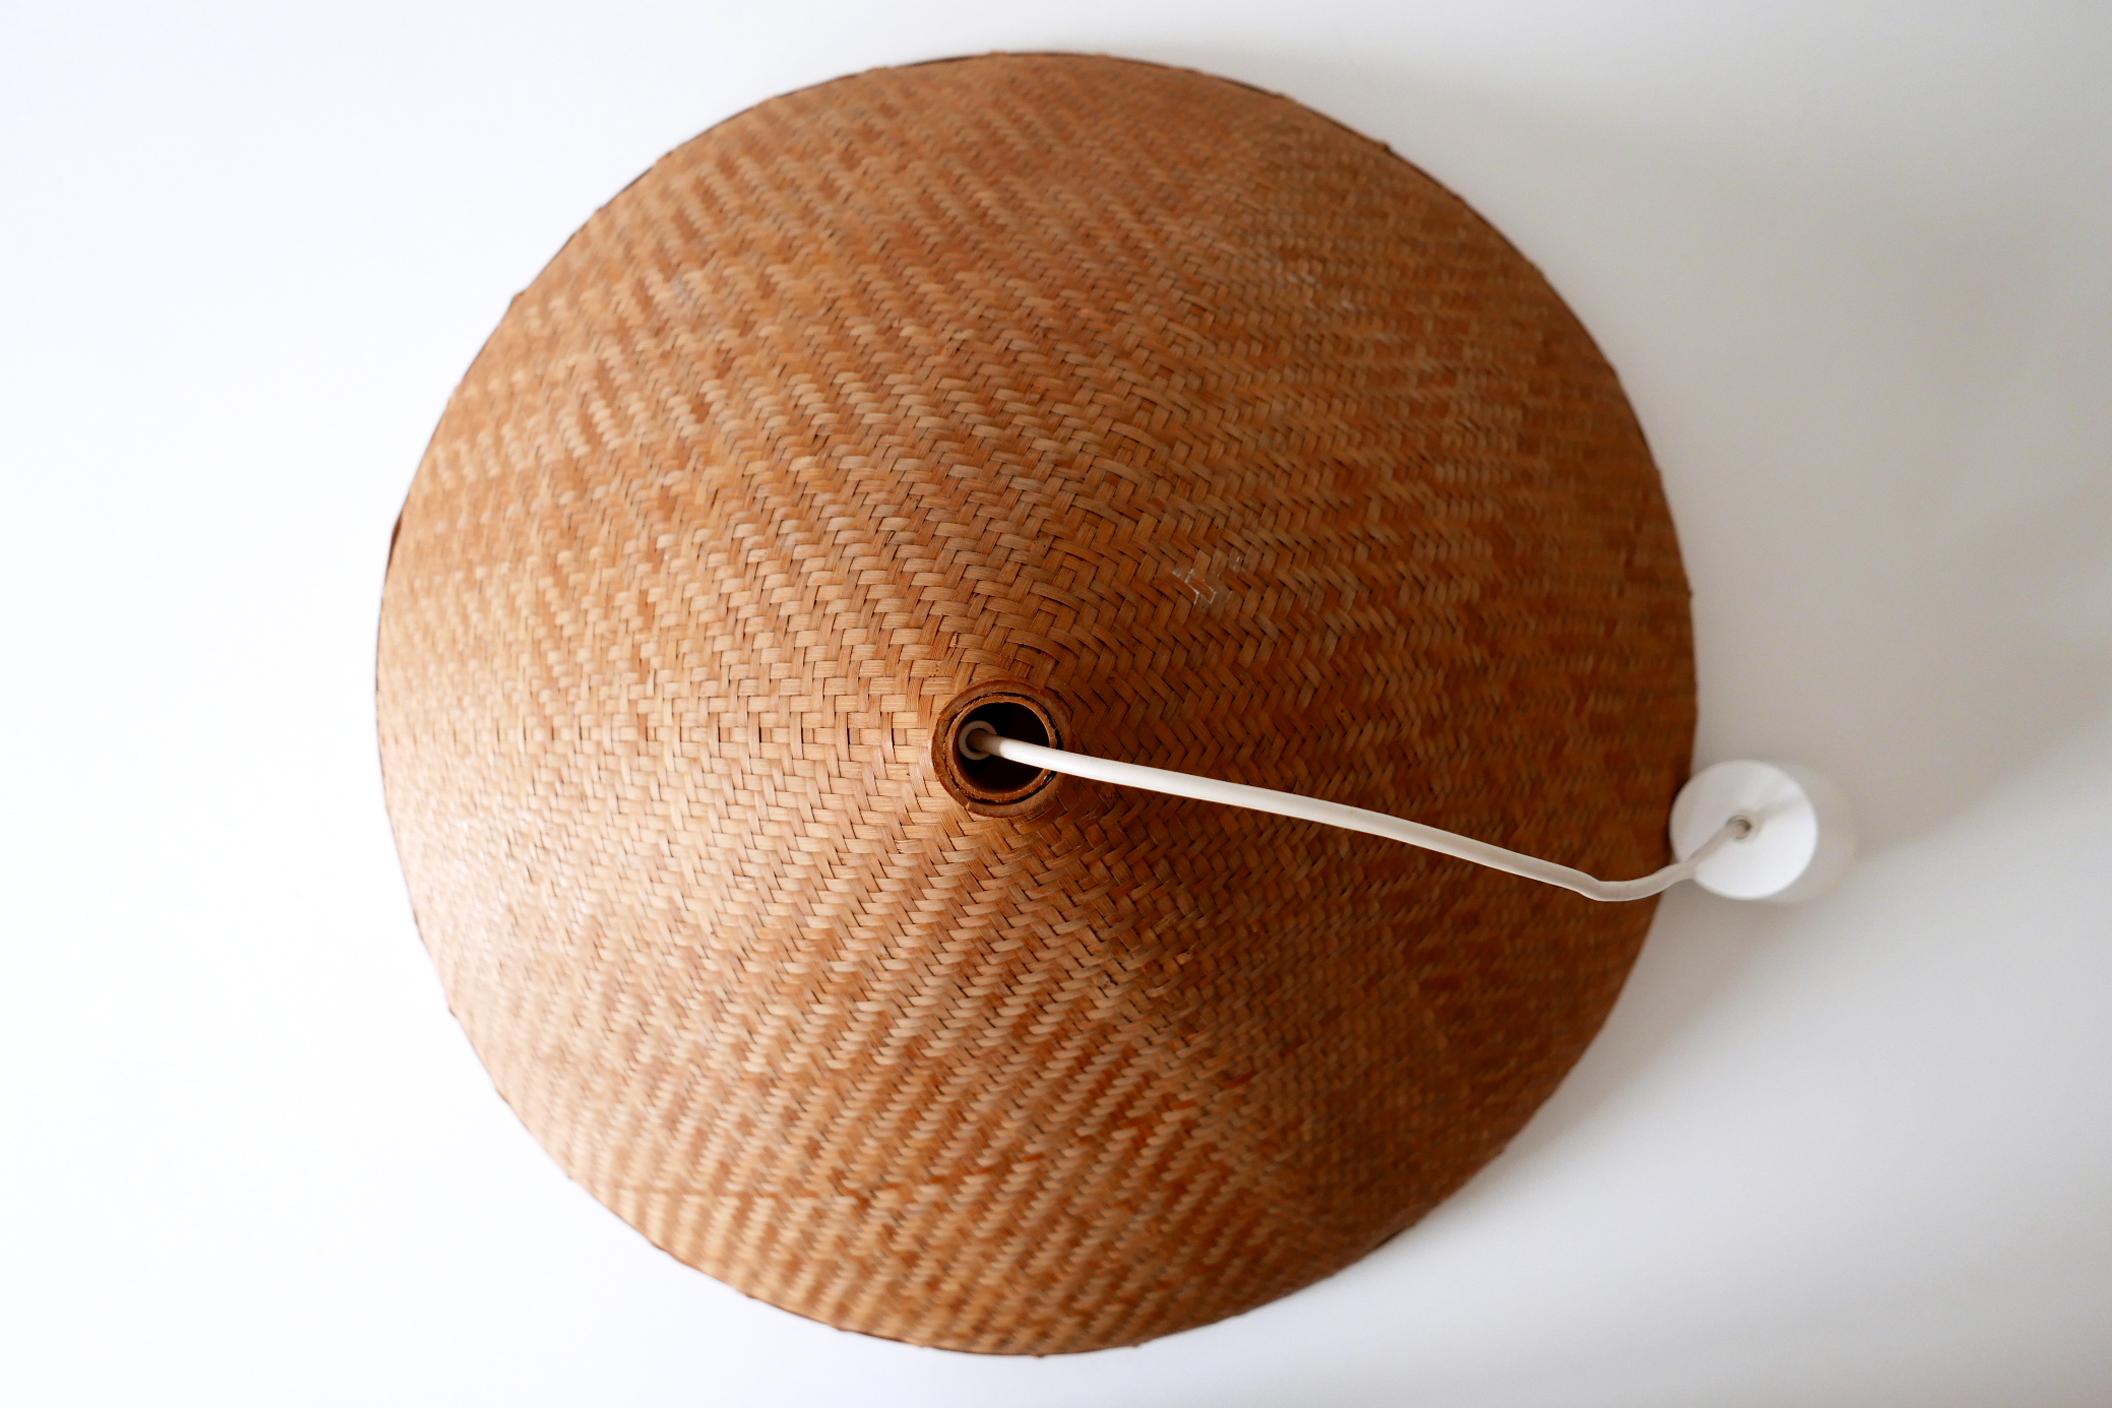 Large Mid-Century Modern Wicker Pendant Lamp or Hanging Light, Germany, 1960s For Sale 9